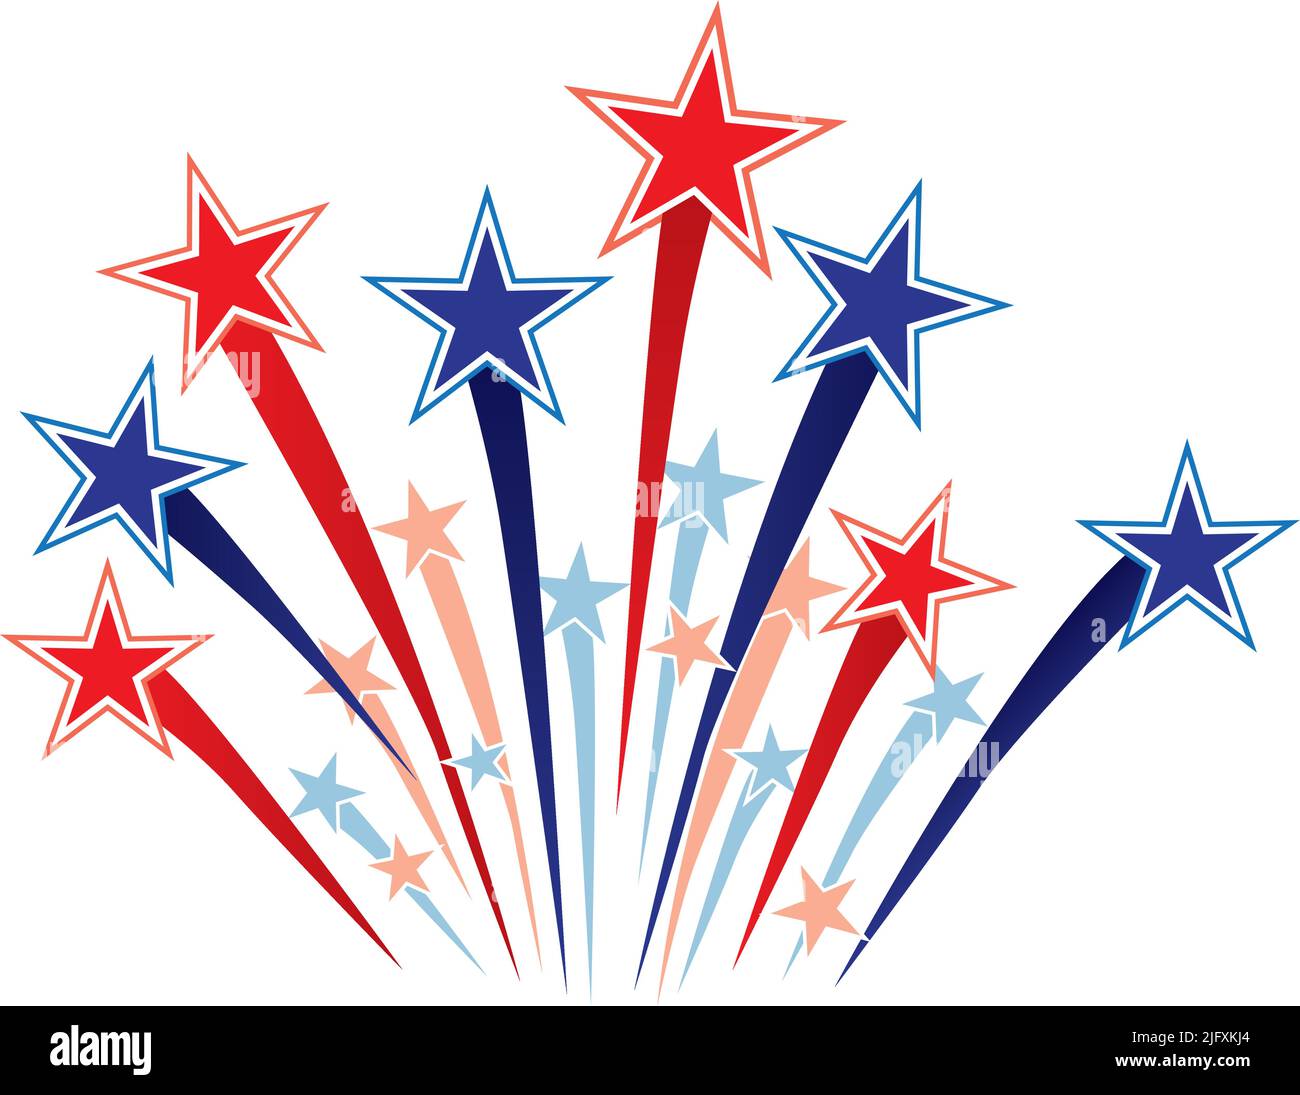 shooting stars starburst red white and blue Stock Vector